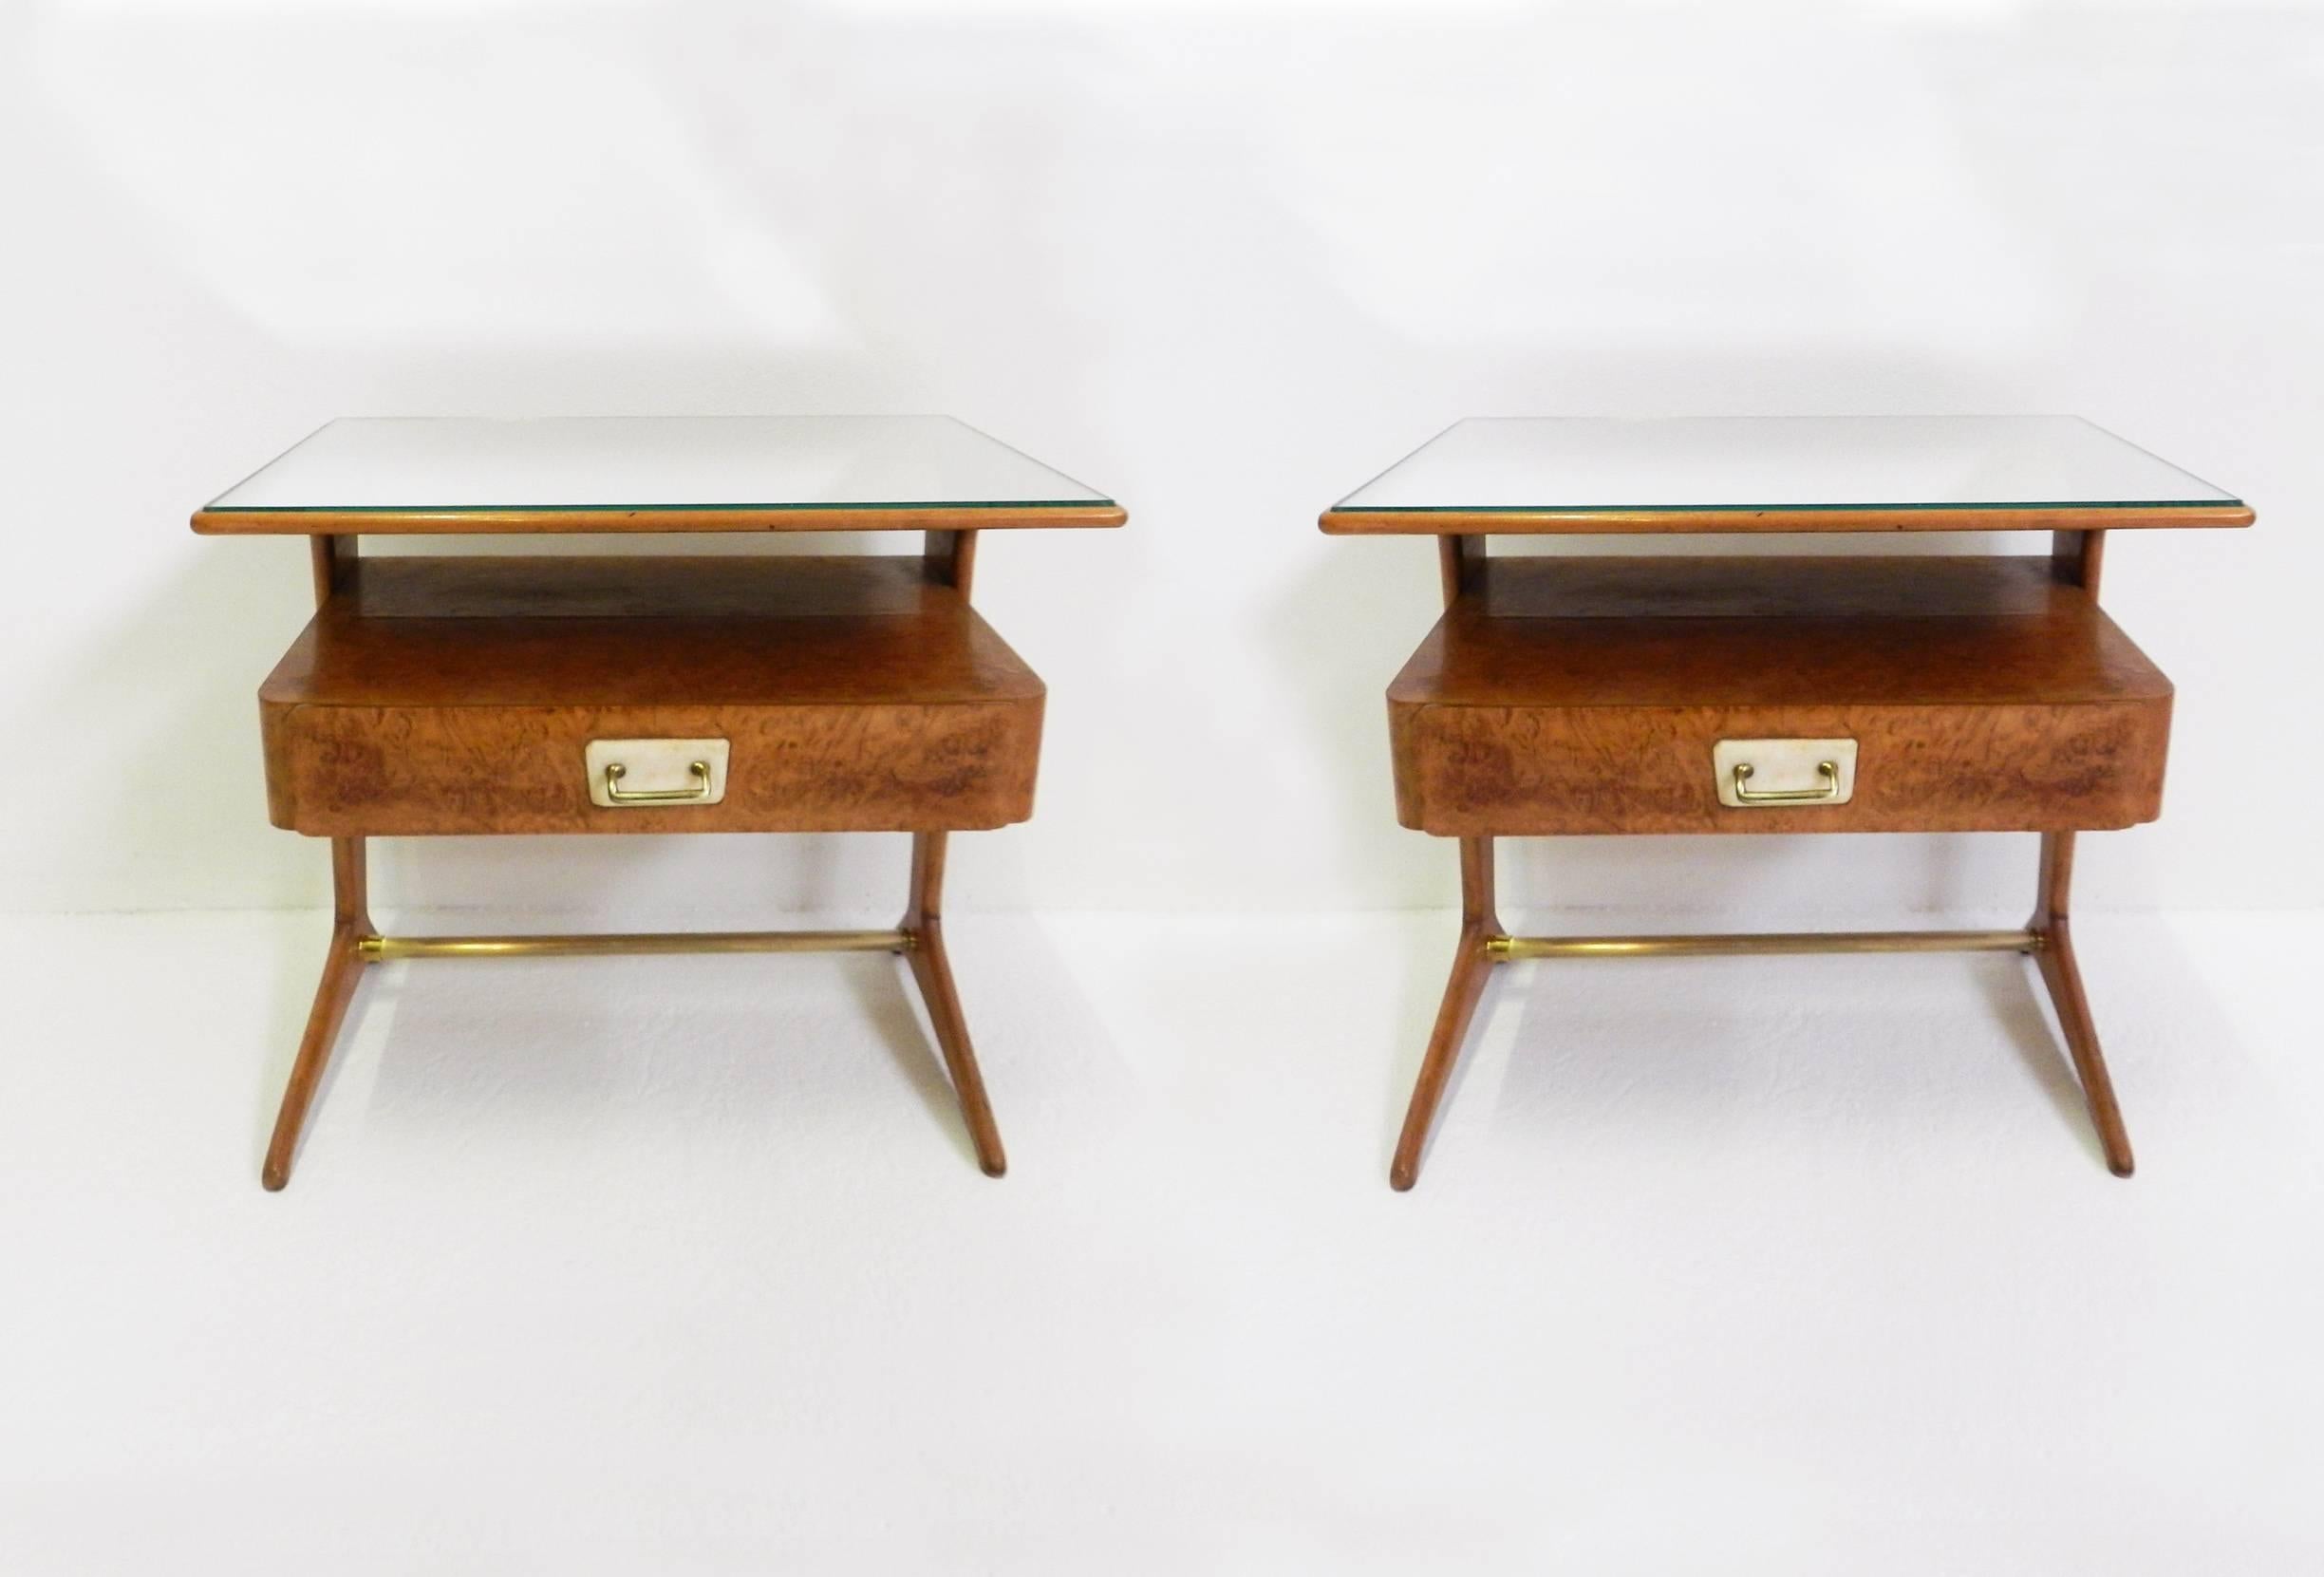 Pair of Italian bedside tables in the style of Icor Parisi. Structure in briar-wood with also the back part nicely done. Top in mirror glass and details in brass and marble.